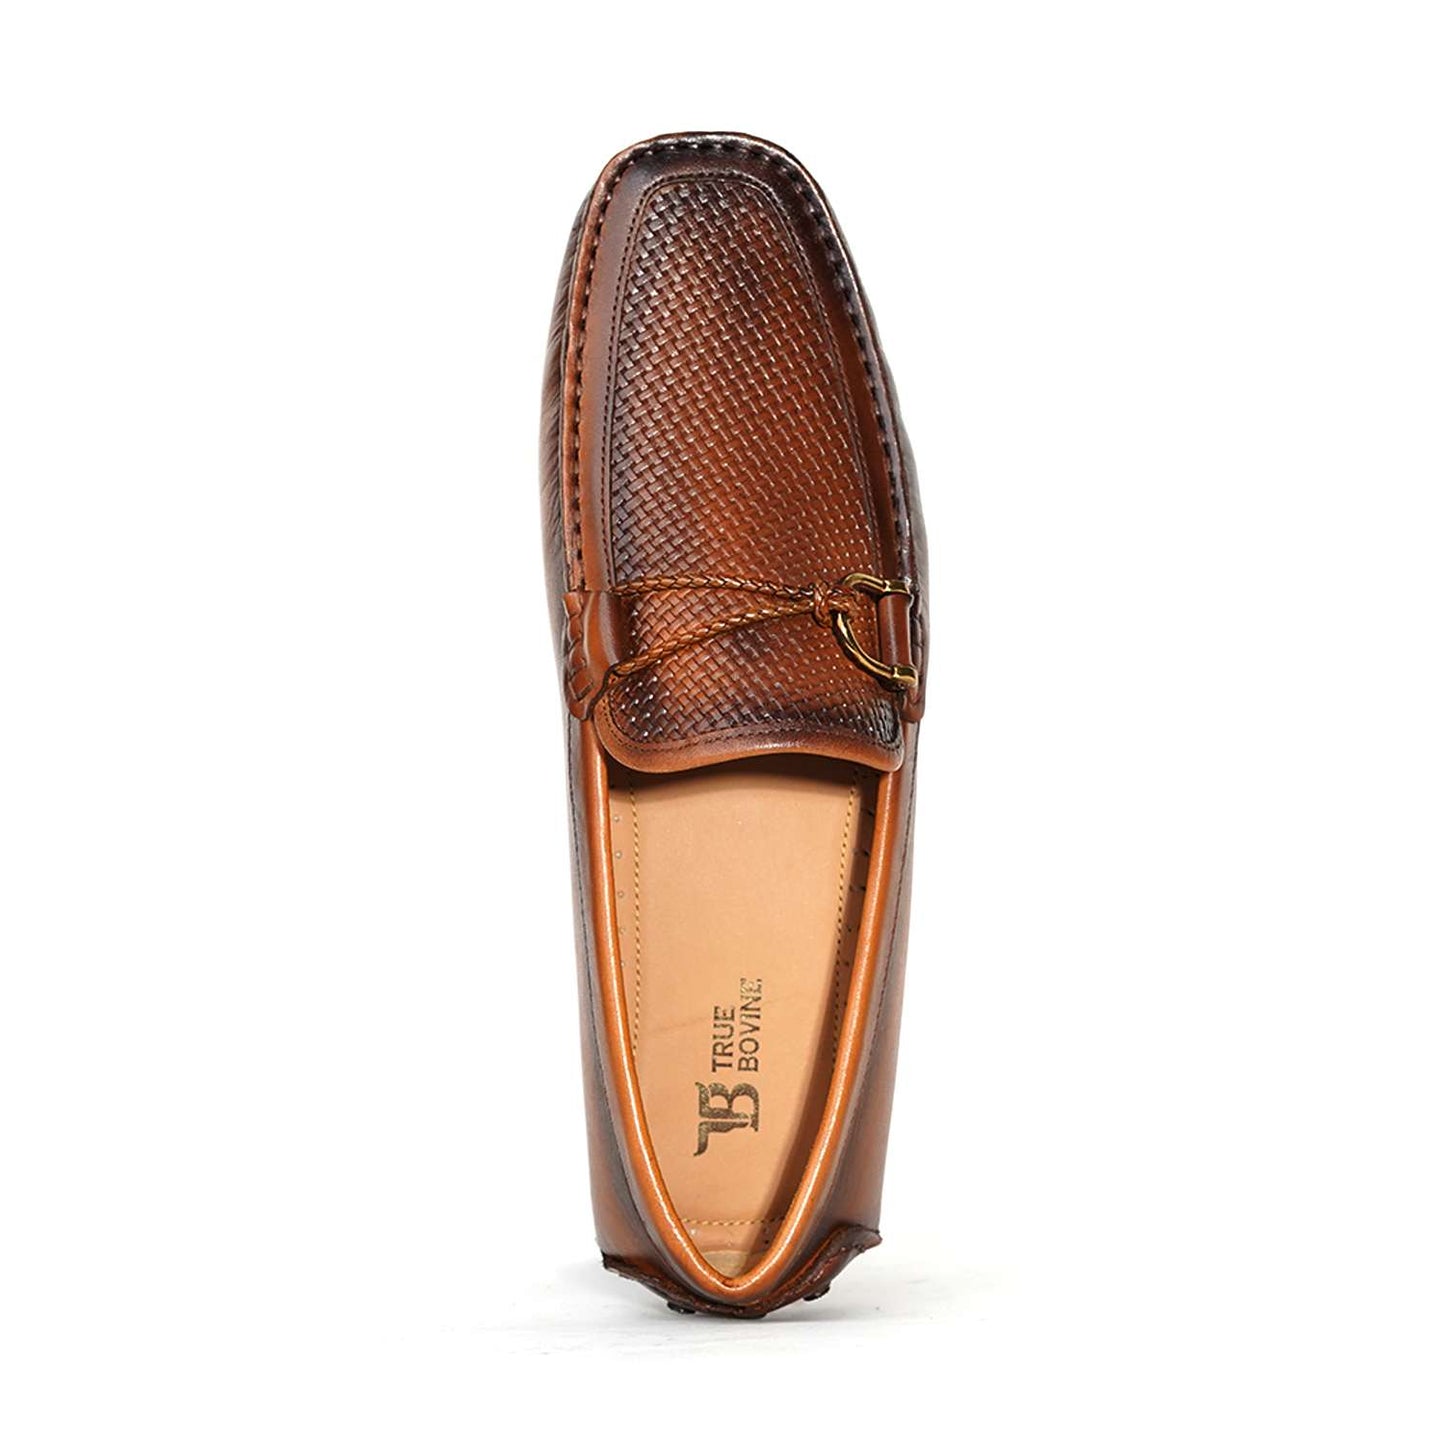 Fab Woven Textured Loafer